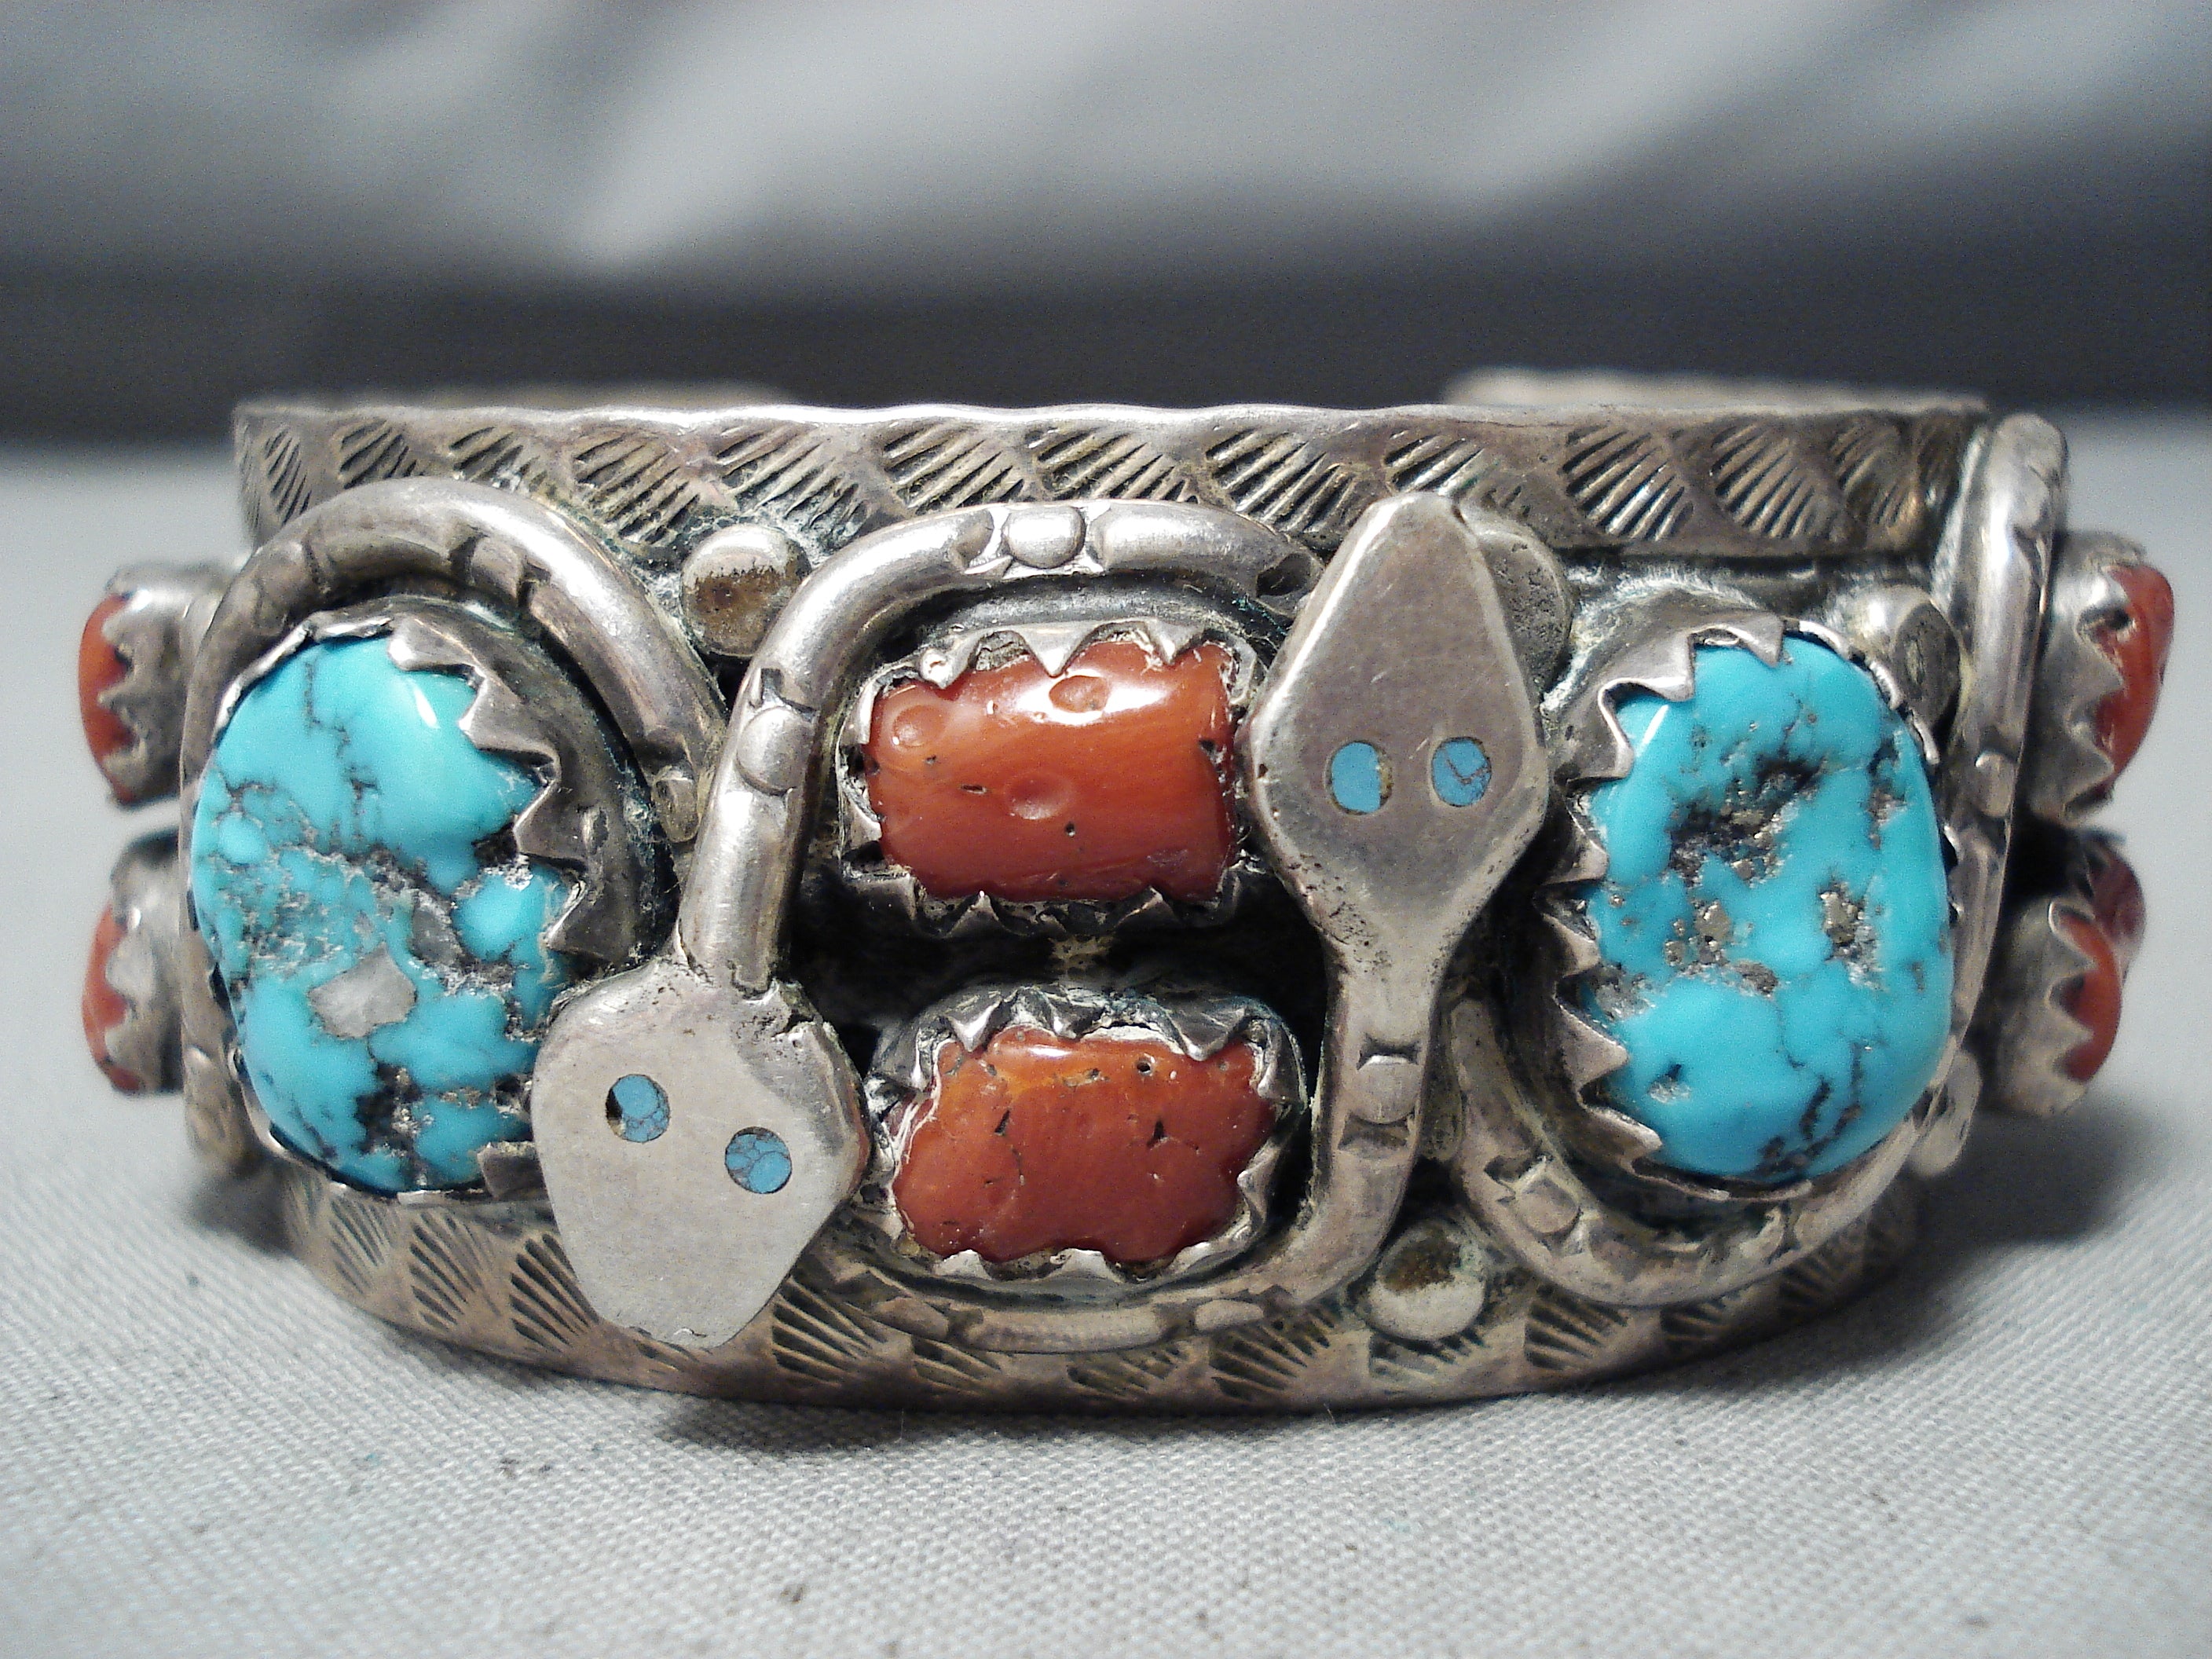 Jay King Gallery Collection Turquoise and Coral Inlay Cuff Bracelet   20814627  HSN